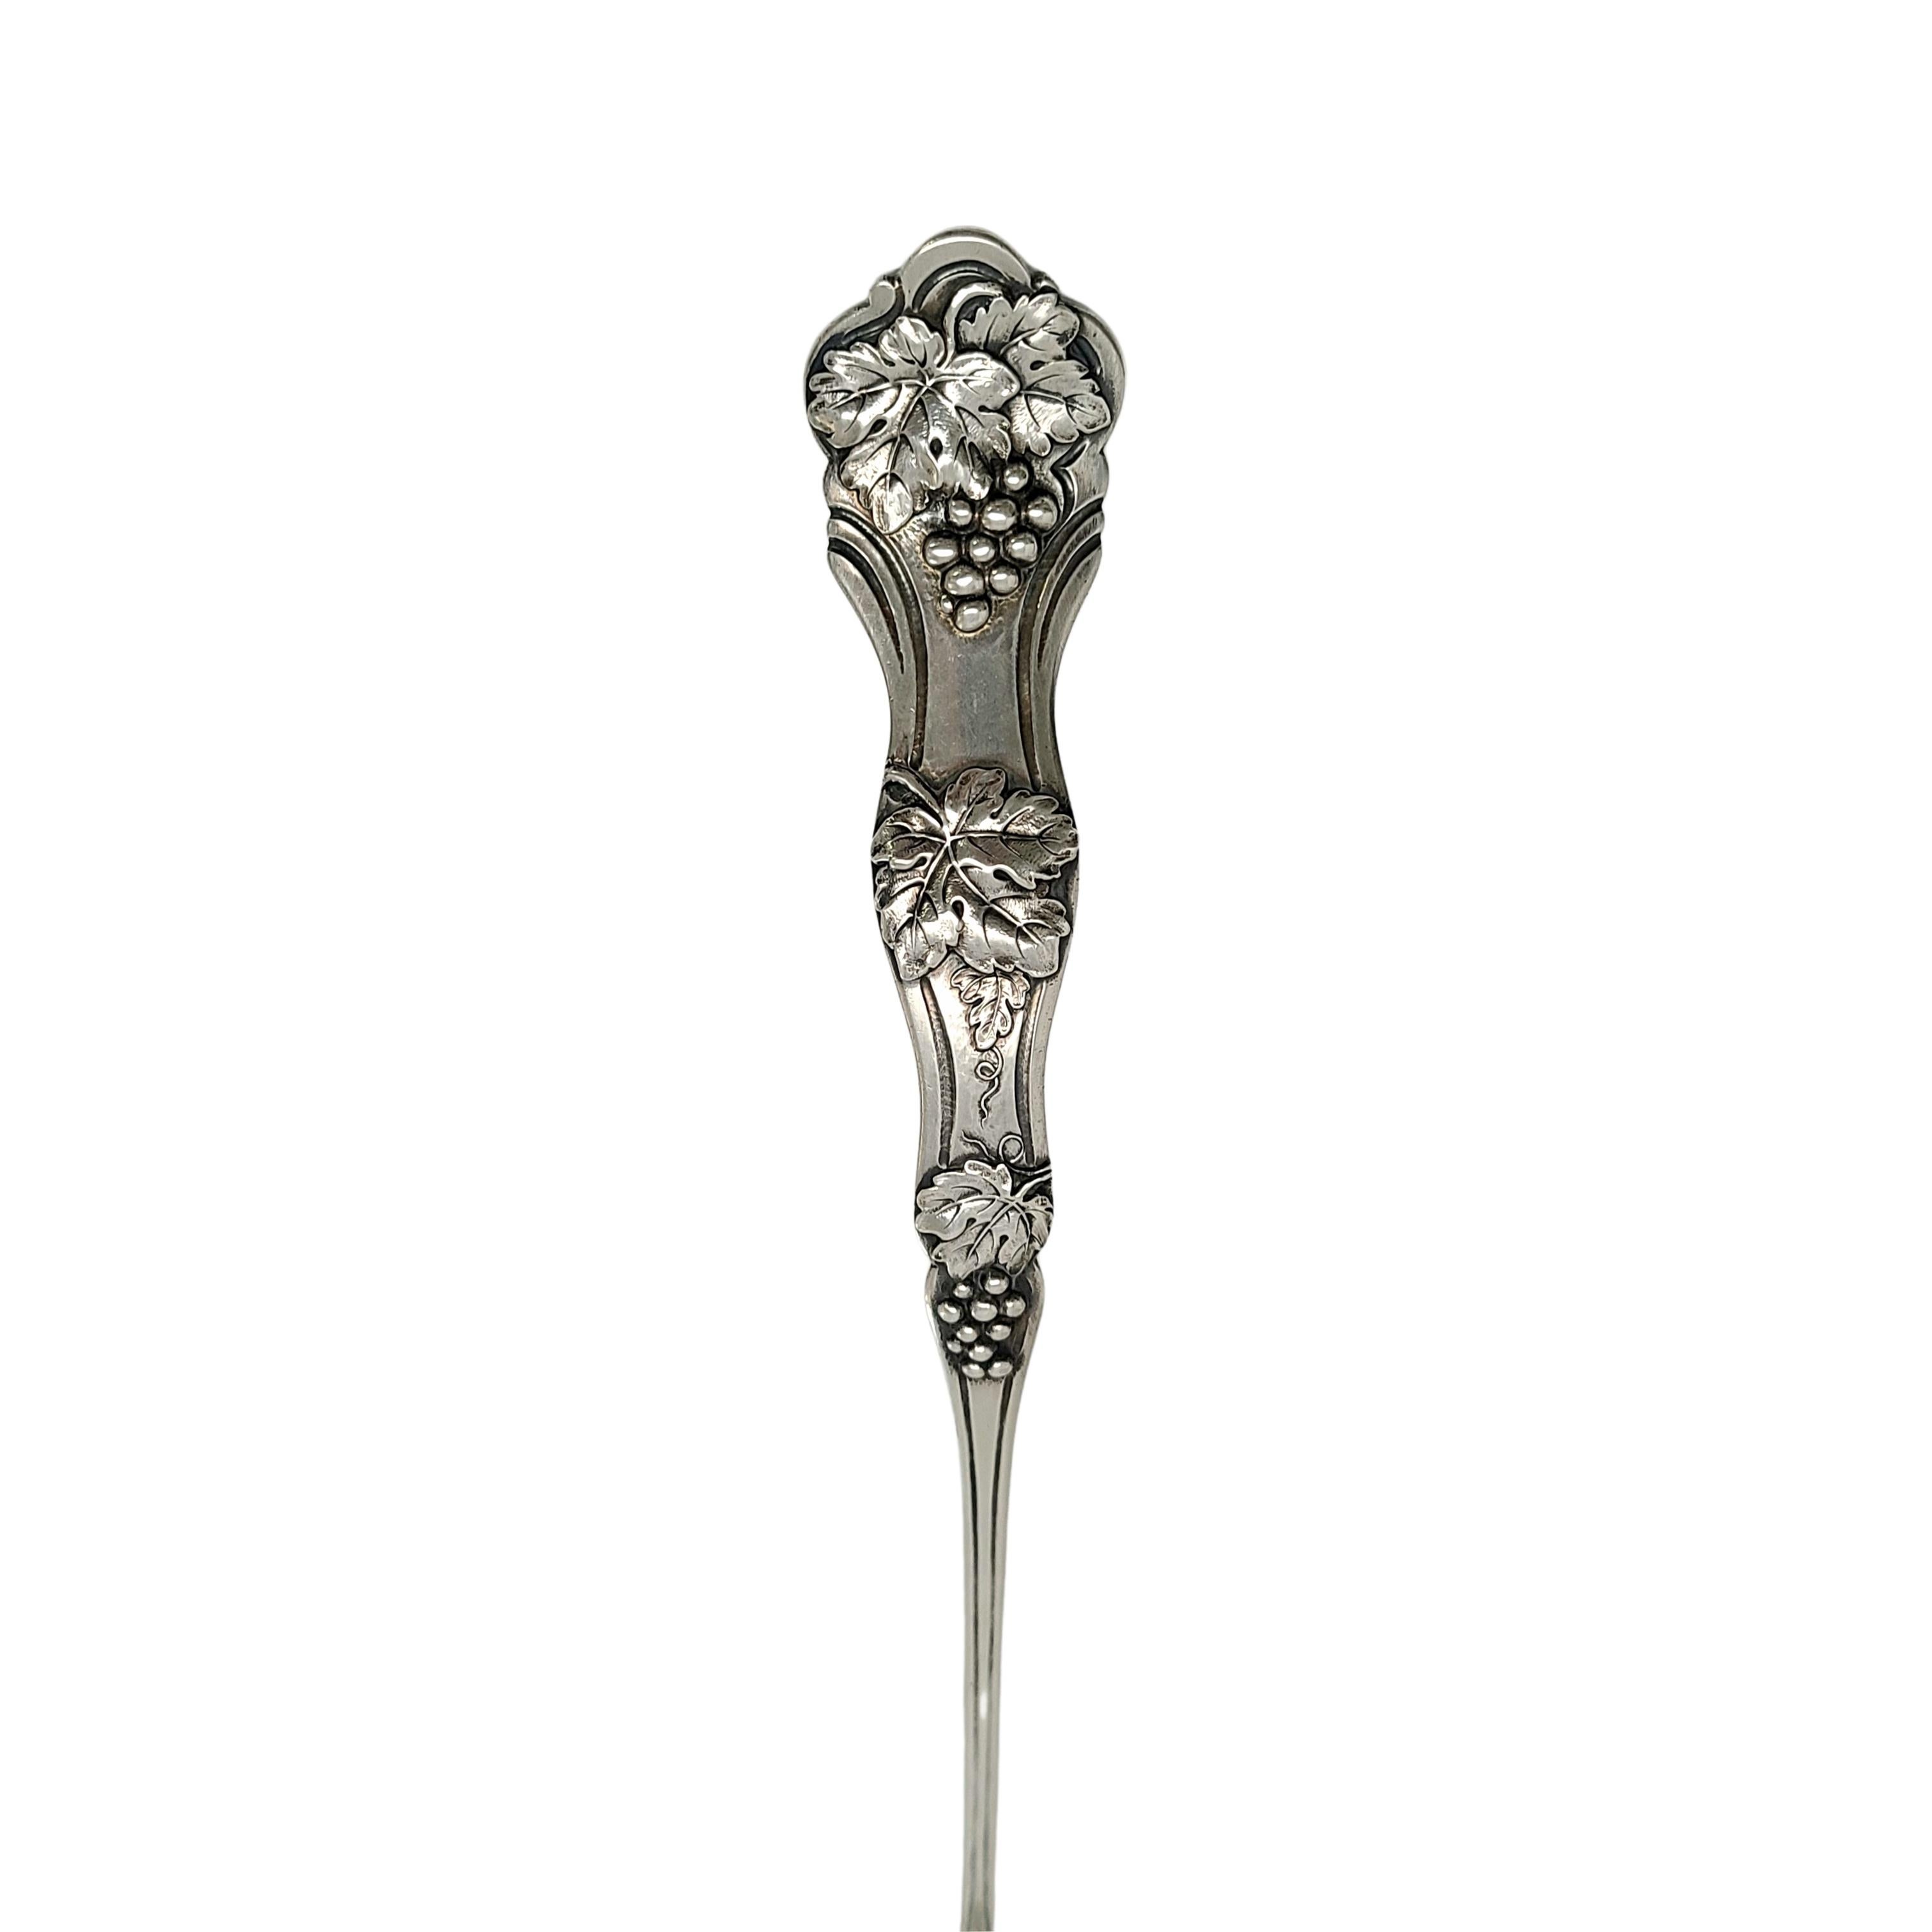 Gorham Sterling Silver Gold Wash Bowl Grapevine Claret Ladle with Monogram In Good Condition For Sale In Washington Depot, CT